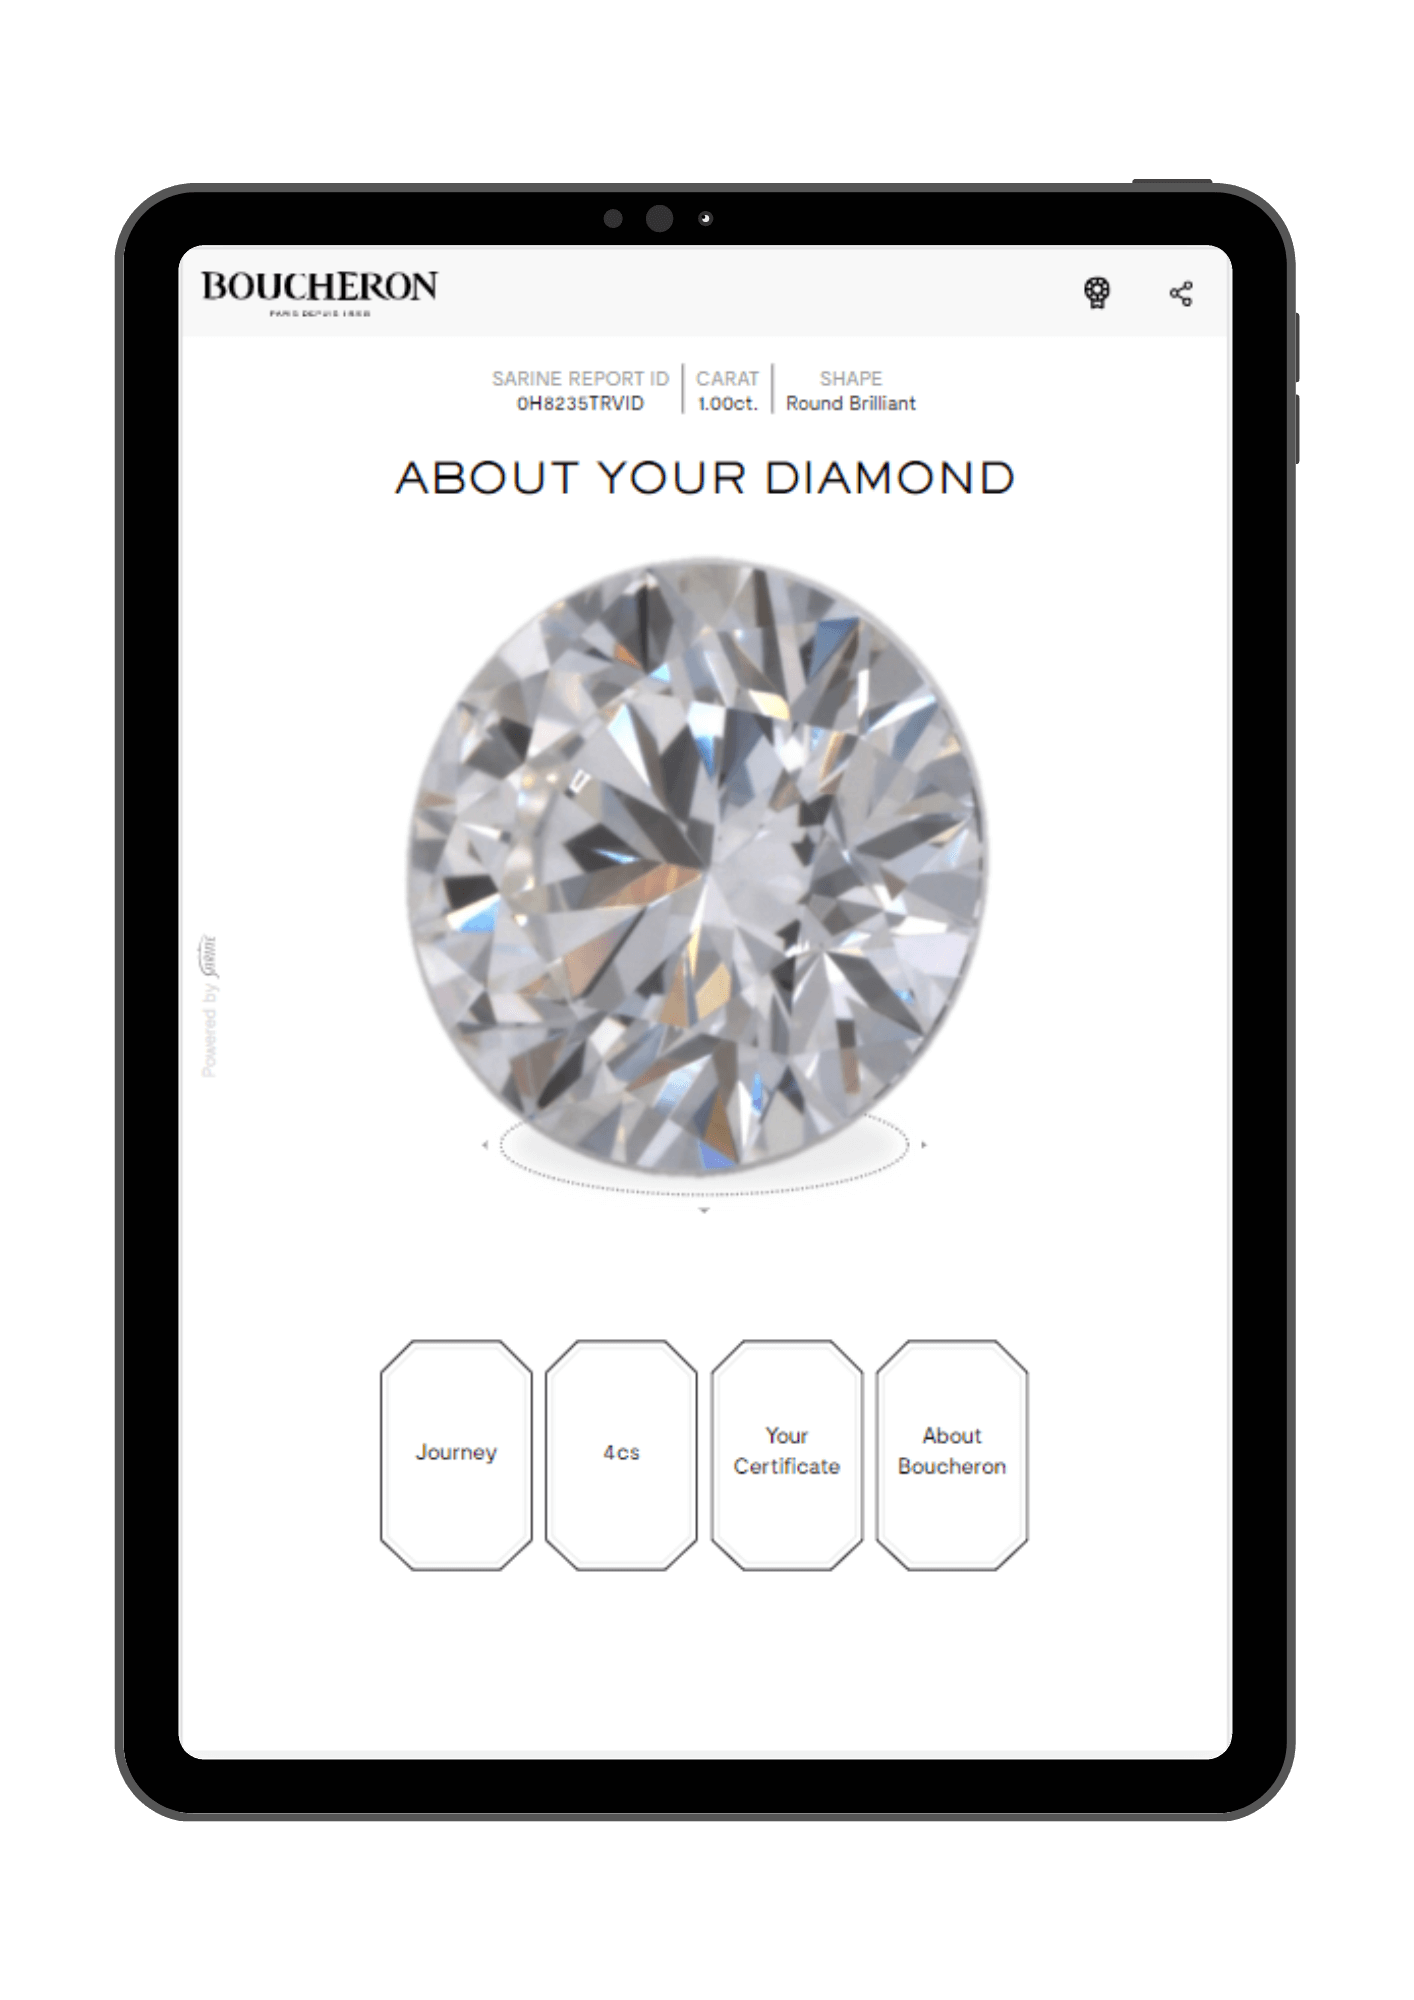 Diamond grading reports and certifications